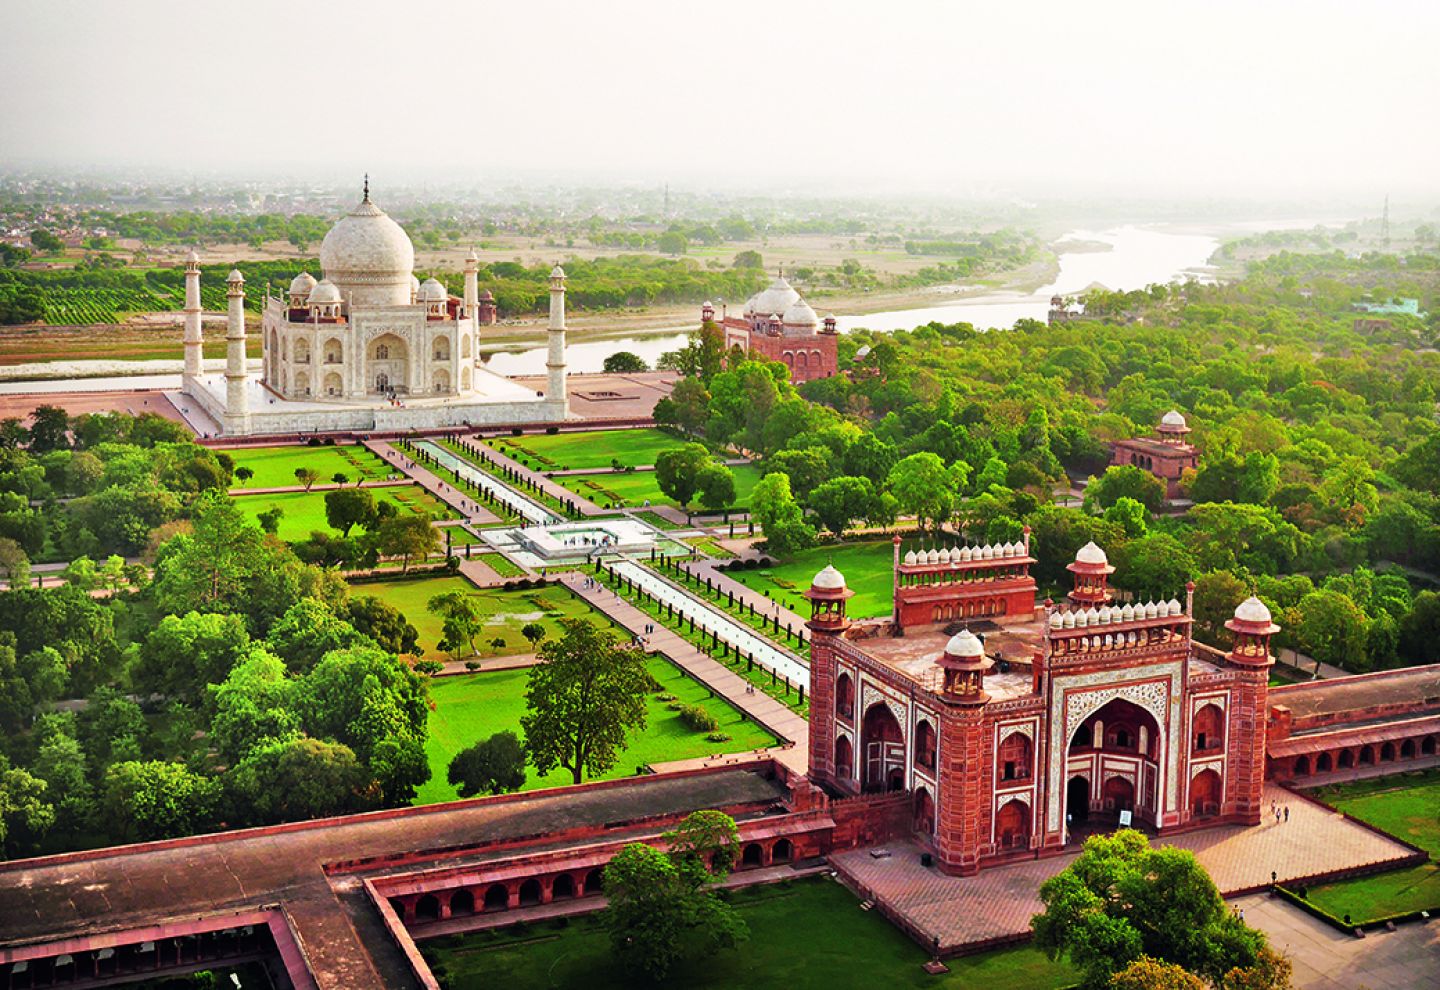 48hr Guide to Agra, India | Food and Travel Magazine